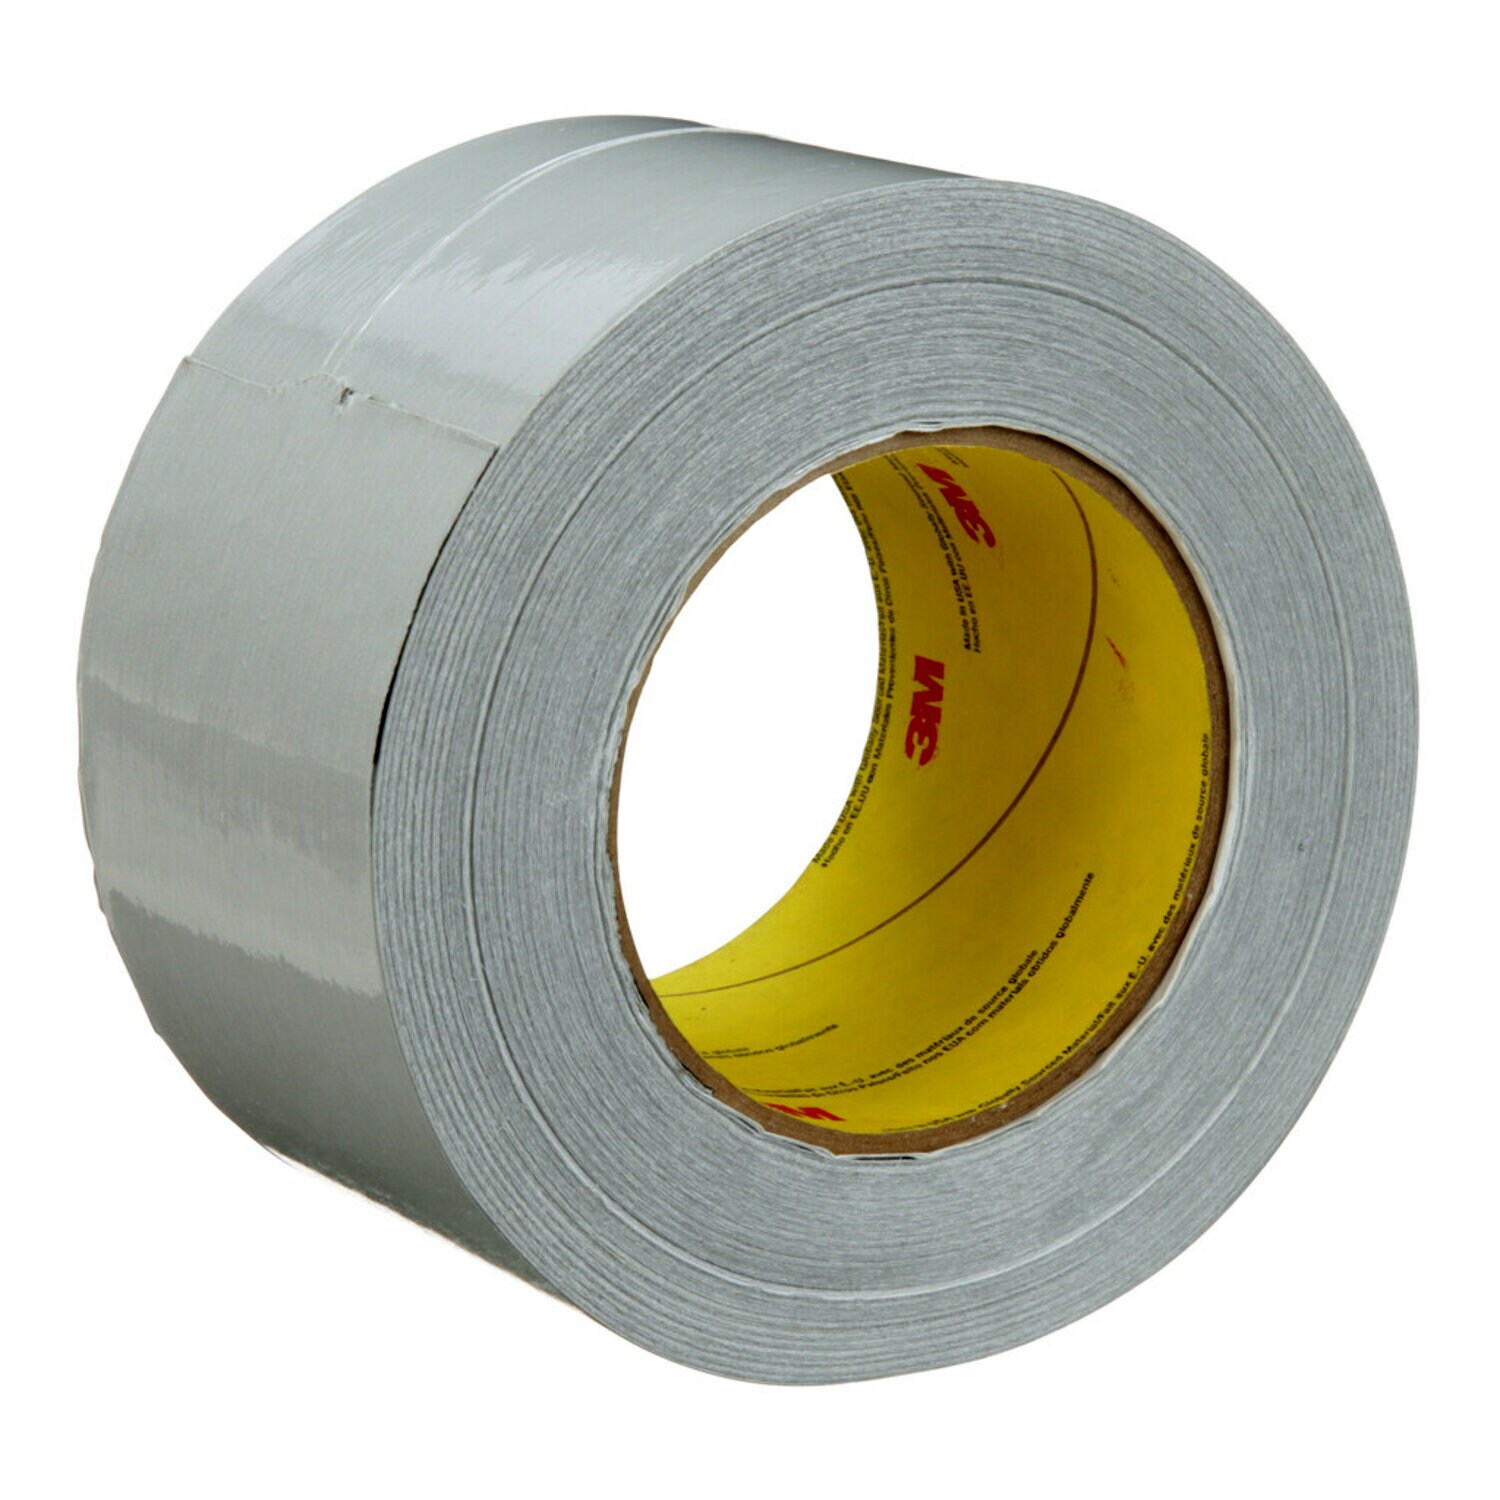 19mm wide x 2.5mm thick Magnetic Tape with Premium Foam Adhesive  (Self-Mating)